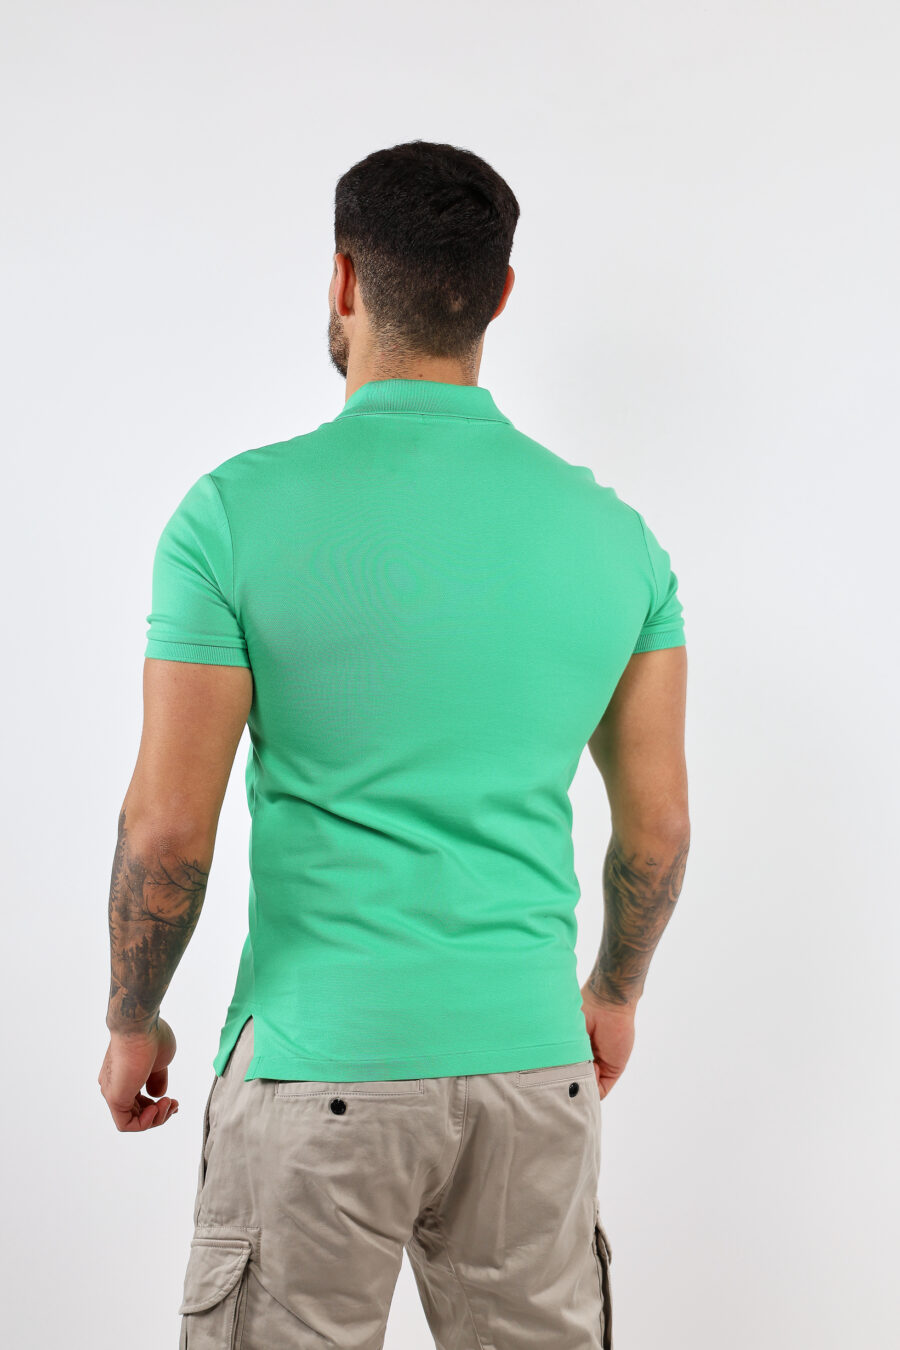 Green and blue T-shirt with mini-logo "polo" - BLS Fashion 175